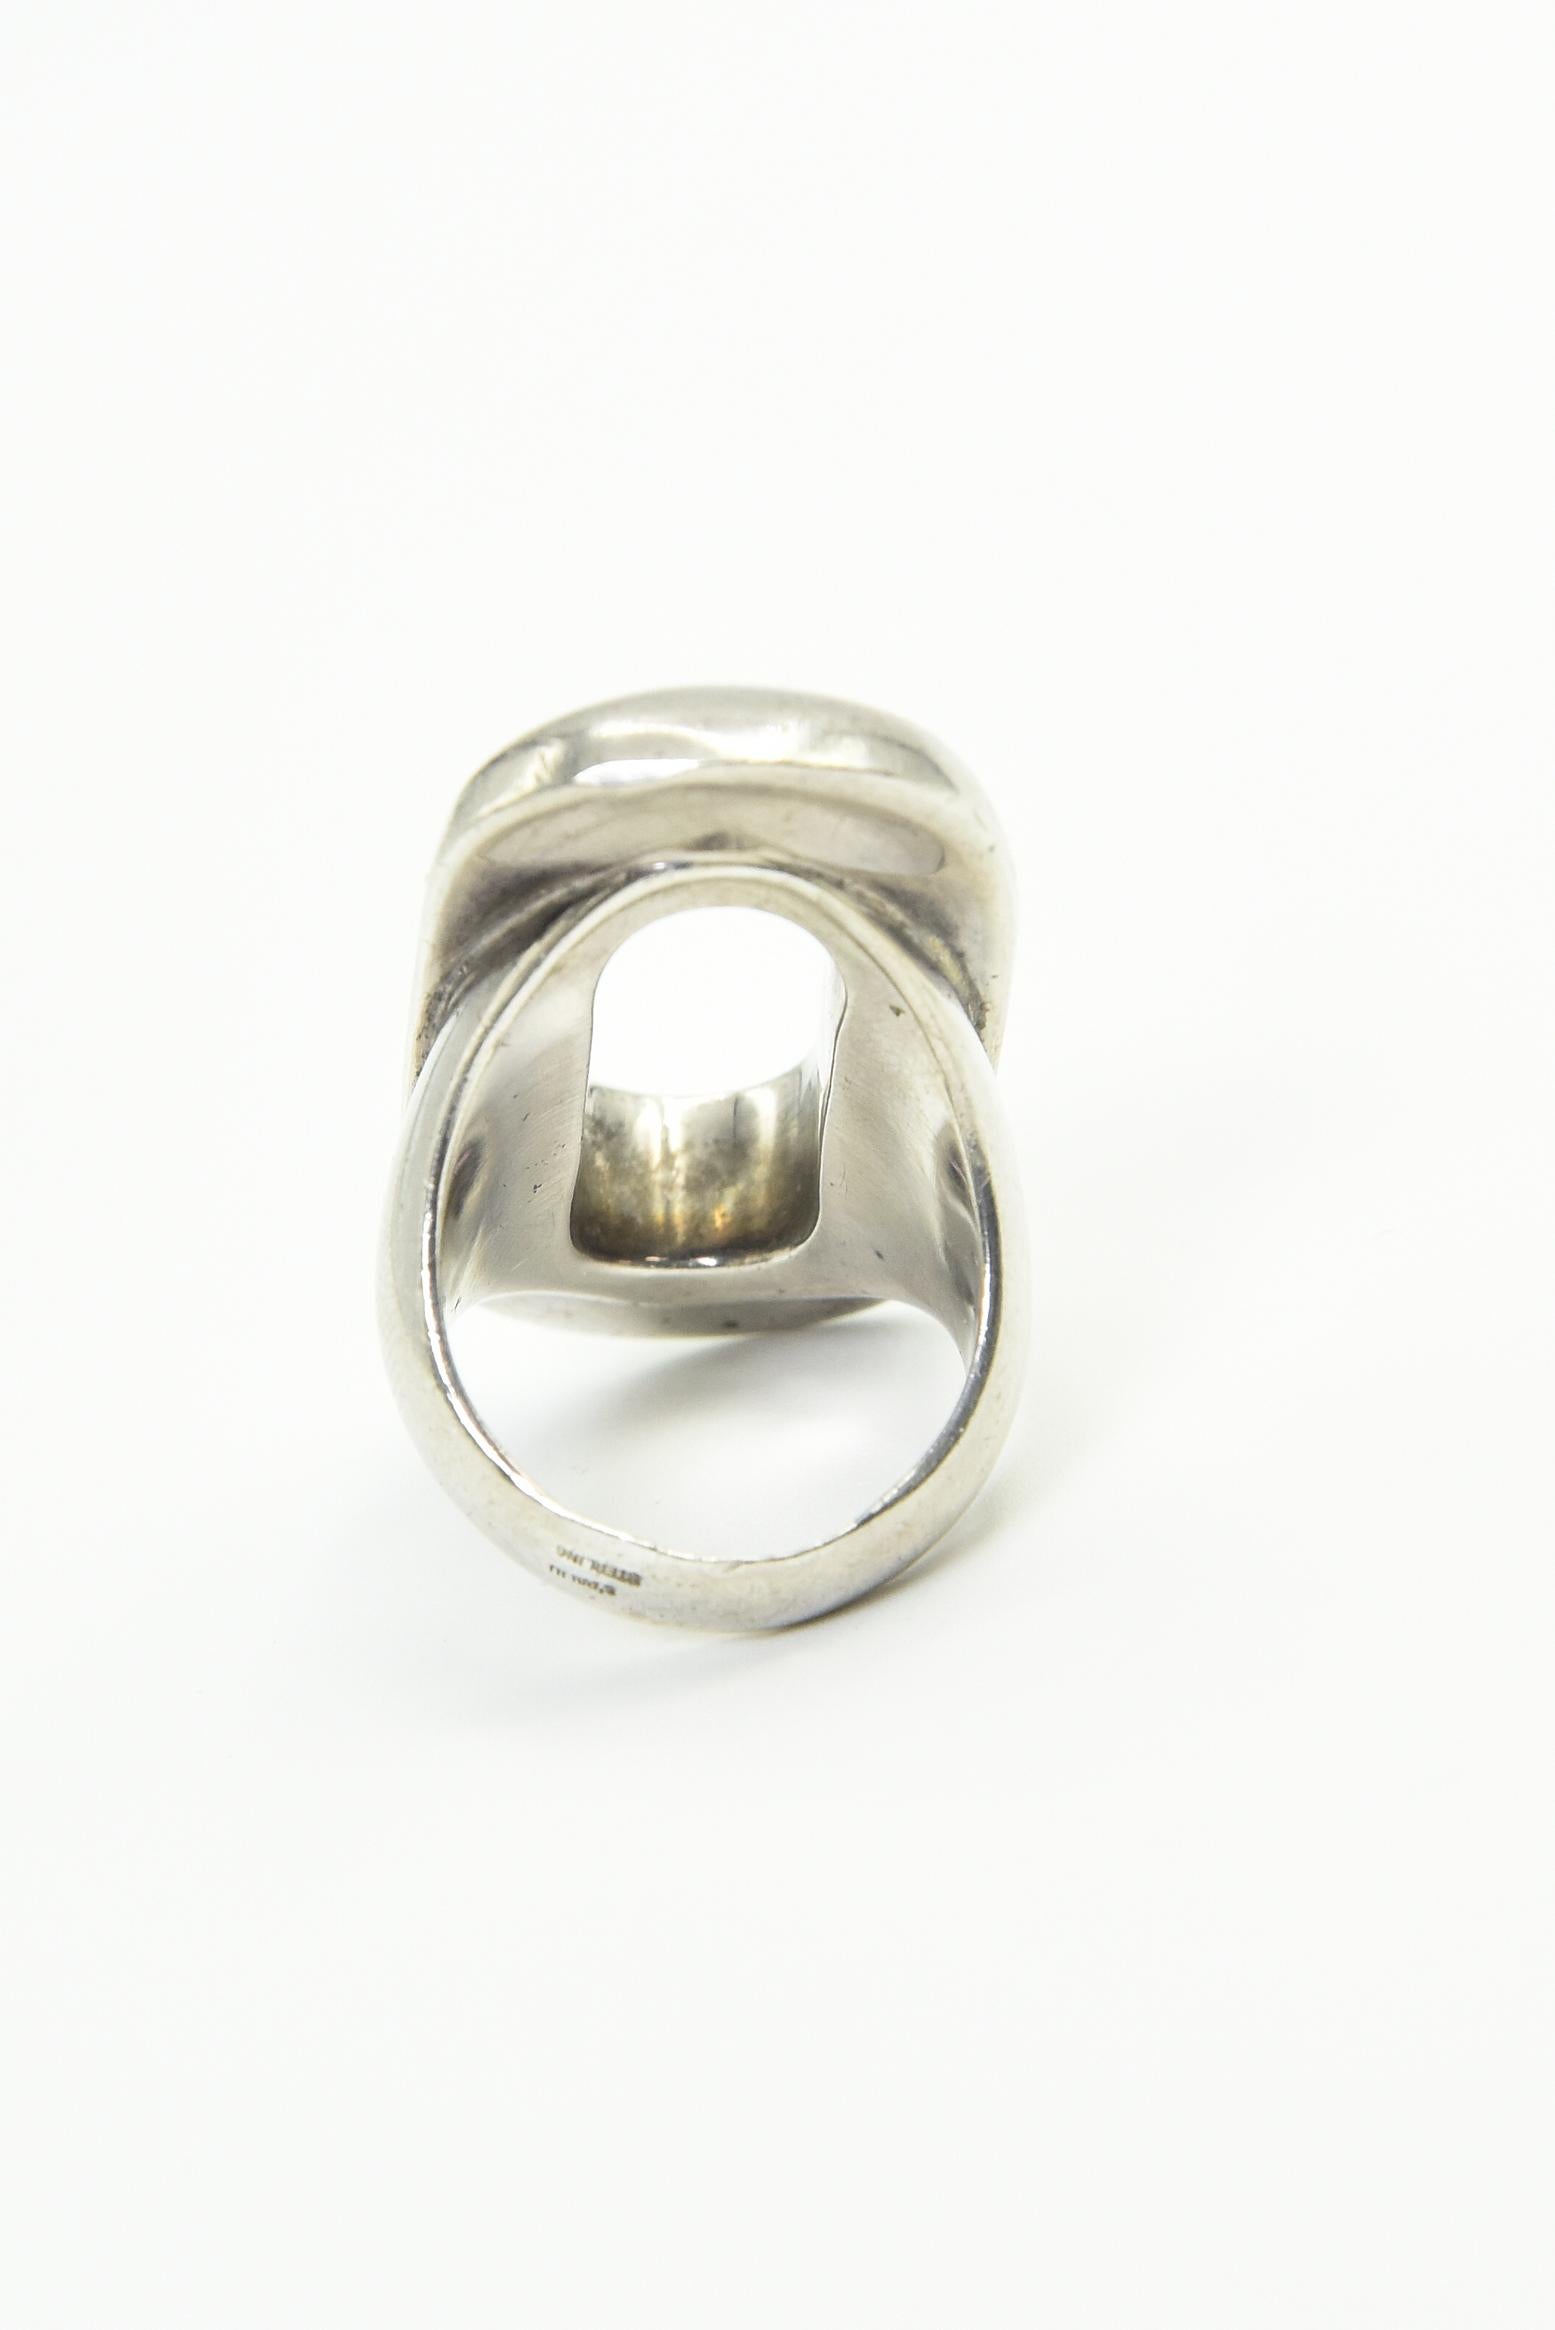 Modernest 1970s S'Paliu Sterling Silver Open Oval Ring 3